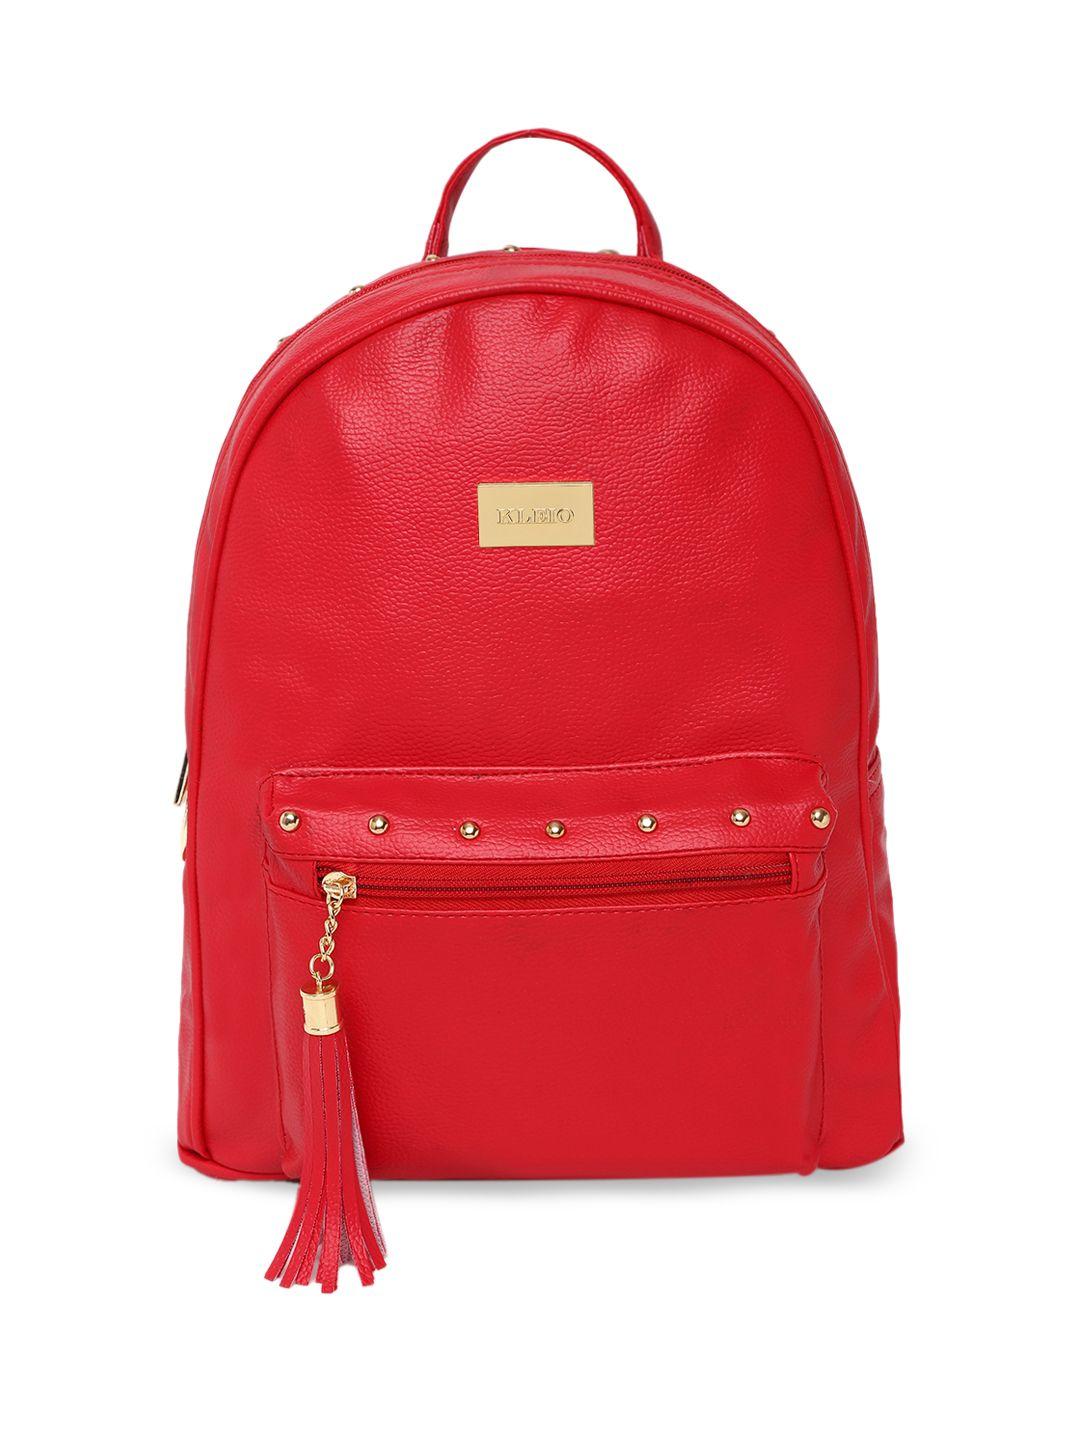 kleio women red solid backpack